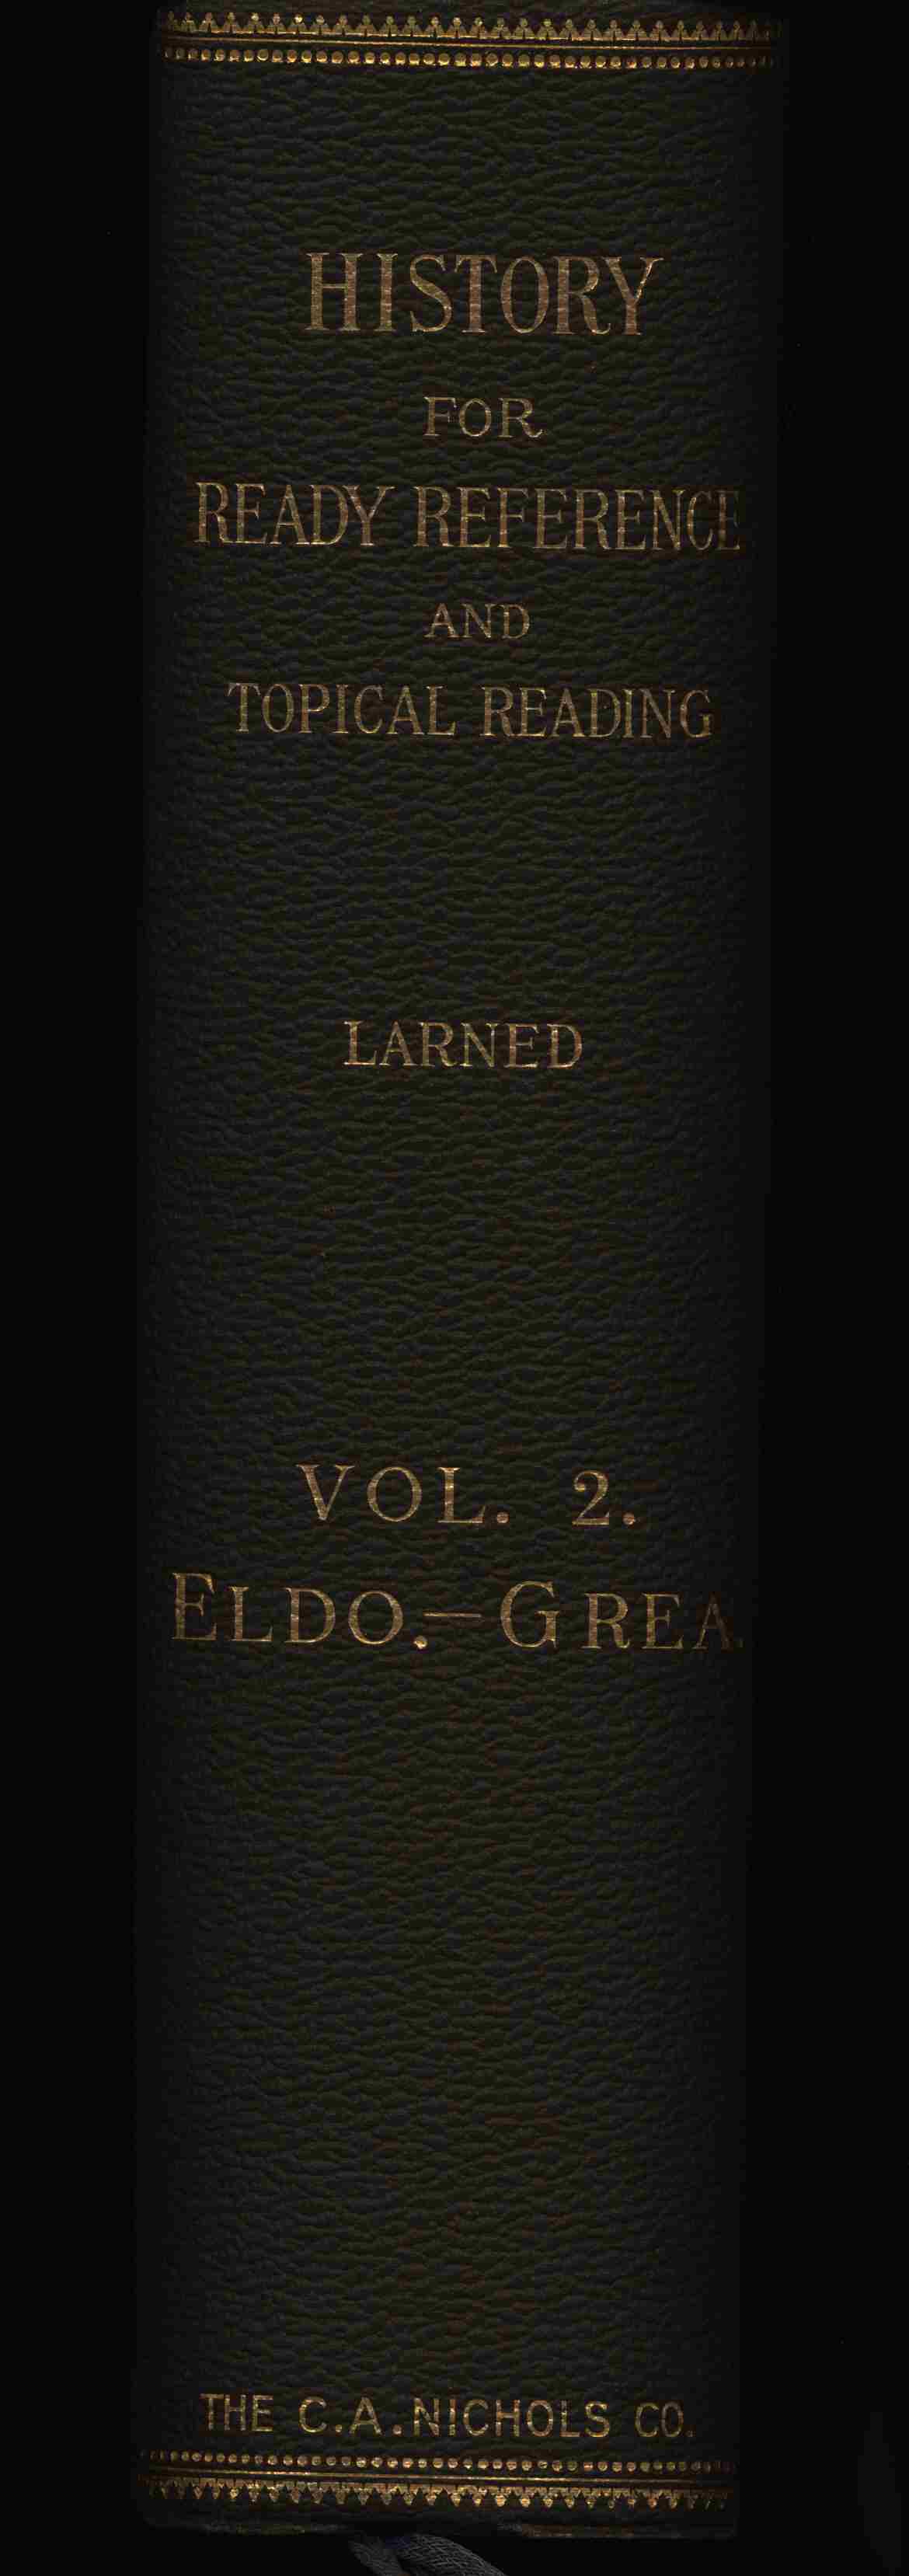 History for Ready Reference by J. N. Larned, Volume 1 of 6